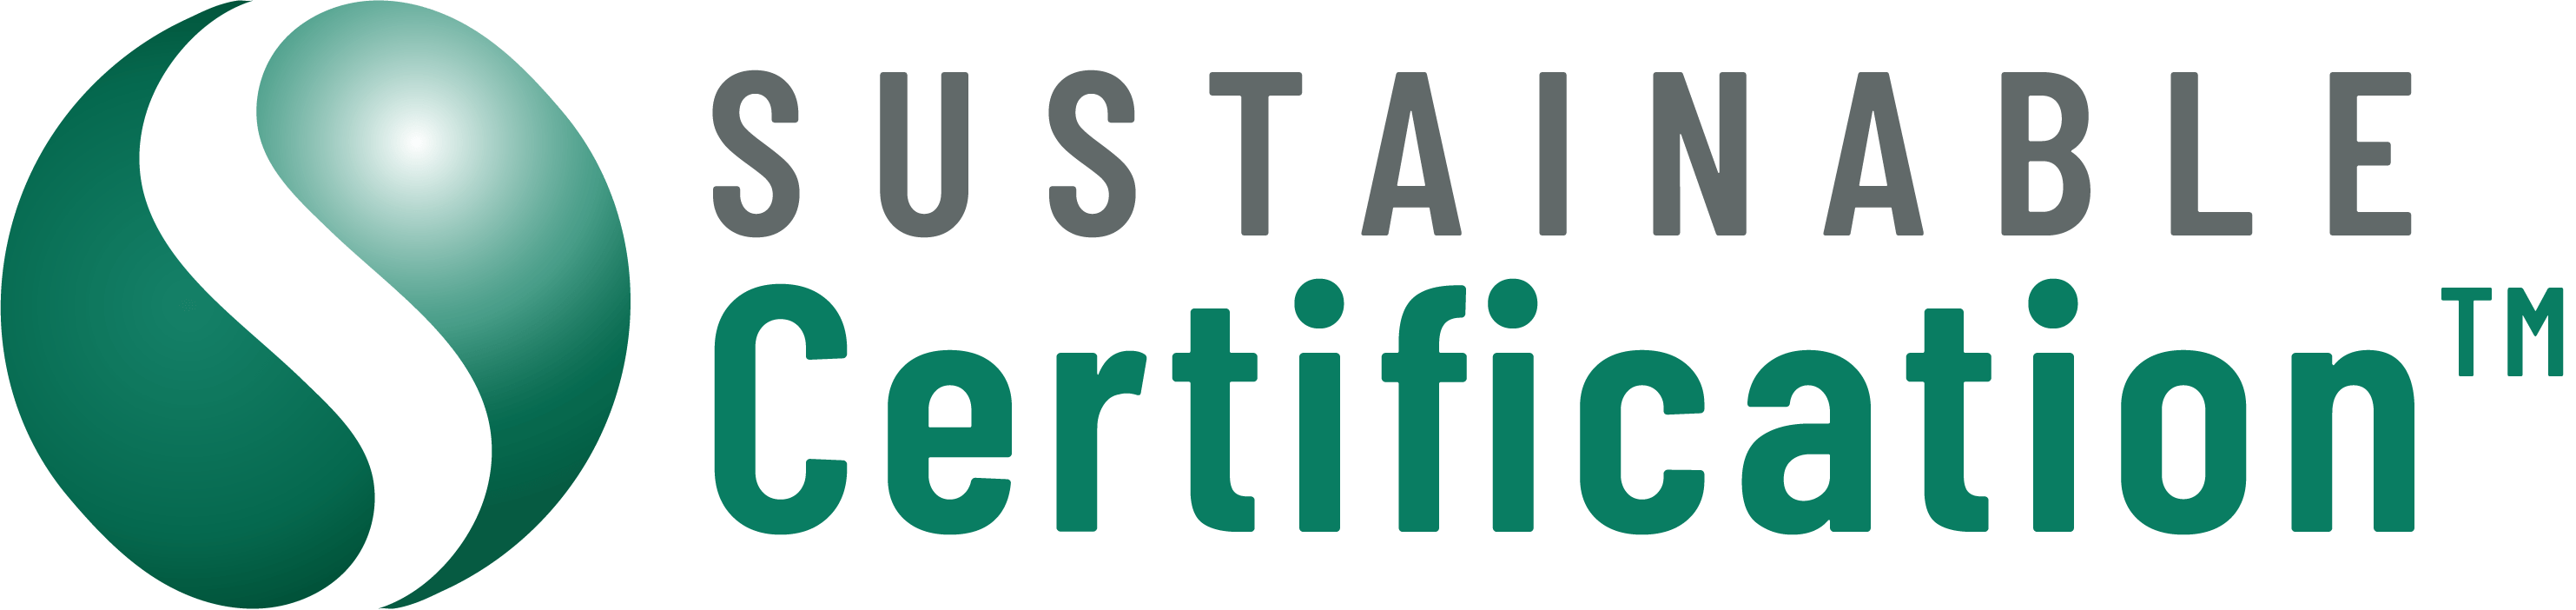 Stage Sustainable Certification